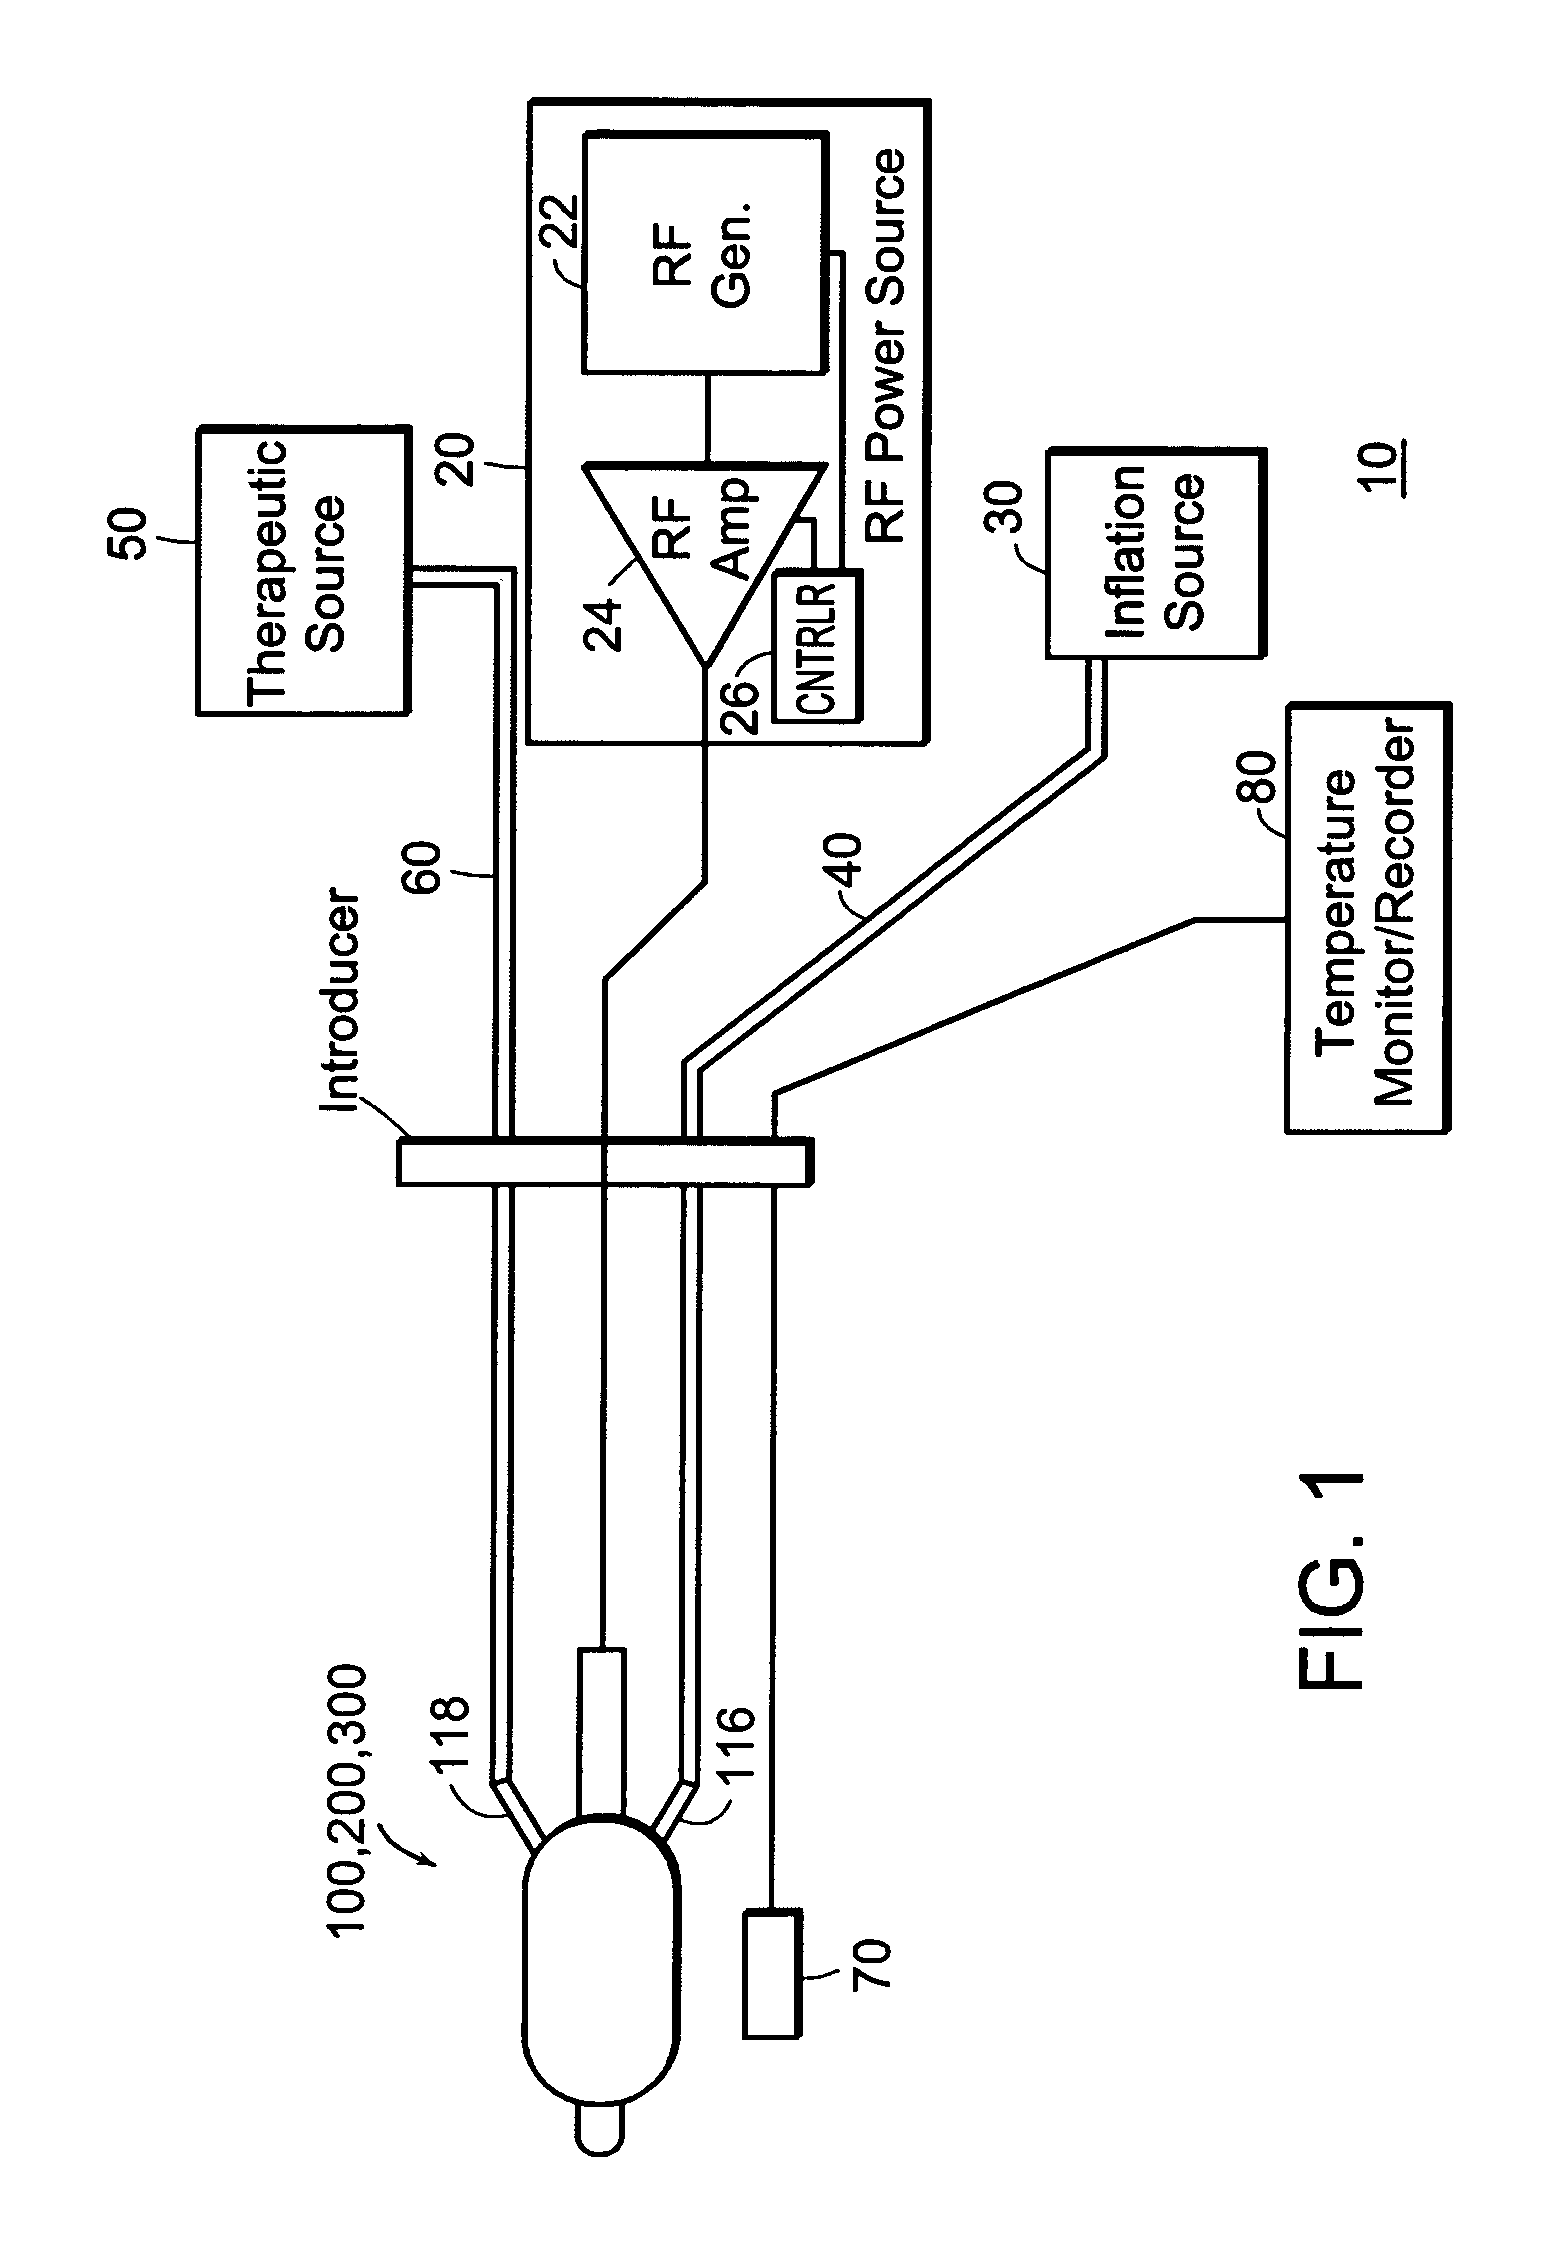 Device, systems and methods for localized heating of a vessel and/or in combination with MR/NMR imaging of the vessel and surrounding tissue